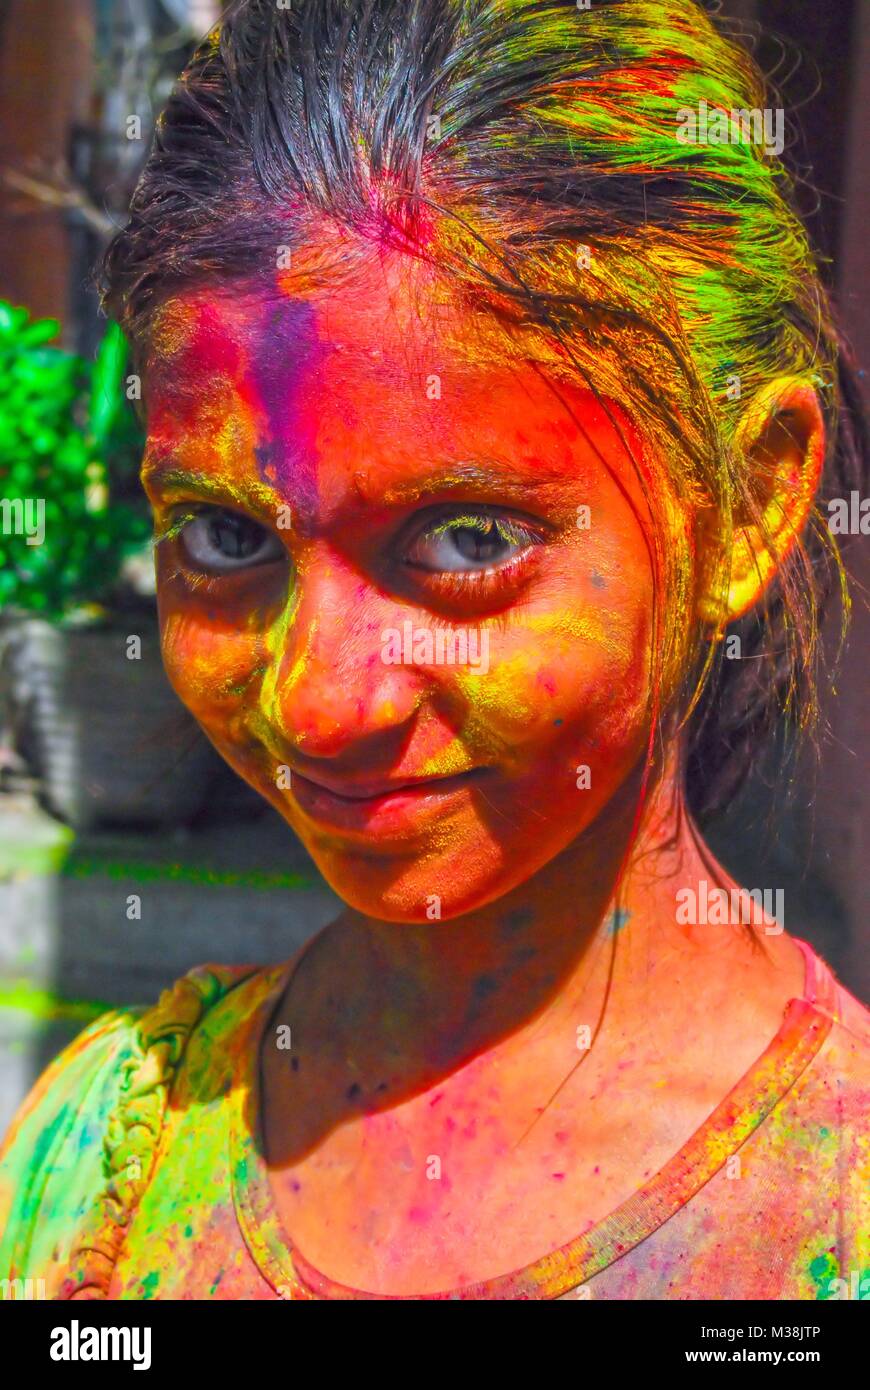 A little girl covered in powder paint during the celebration of the Hindu spring festival Holi in New Delhi, India. Stock Photo